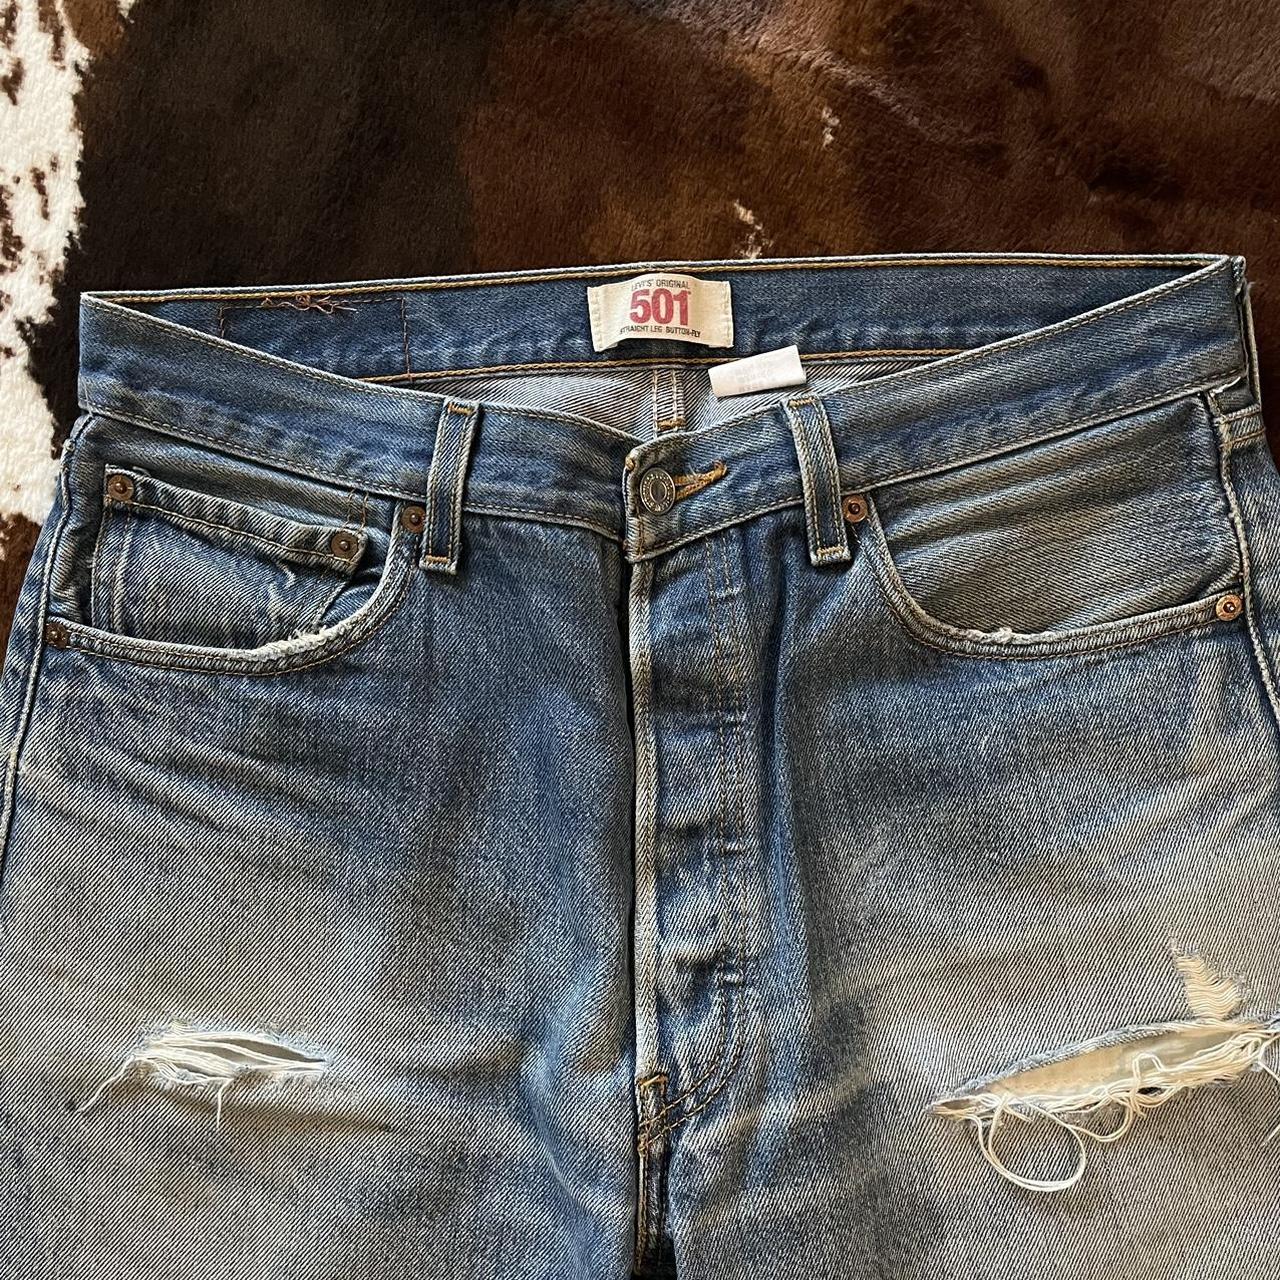 Levi’s 501 Made in Mexico and distressed to... - Depop